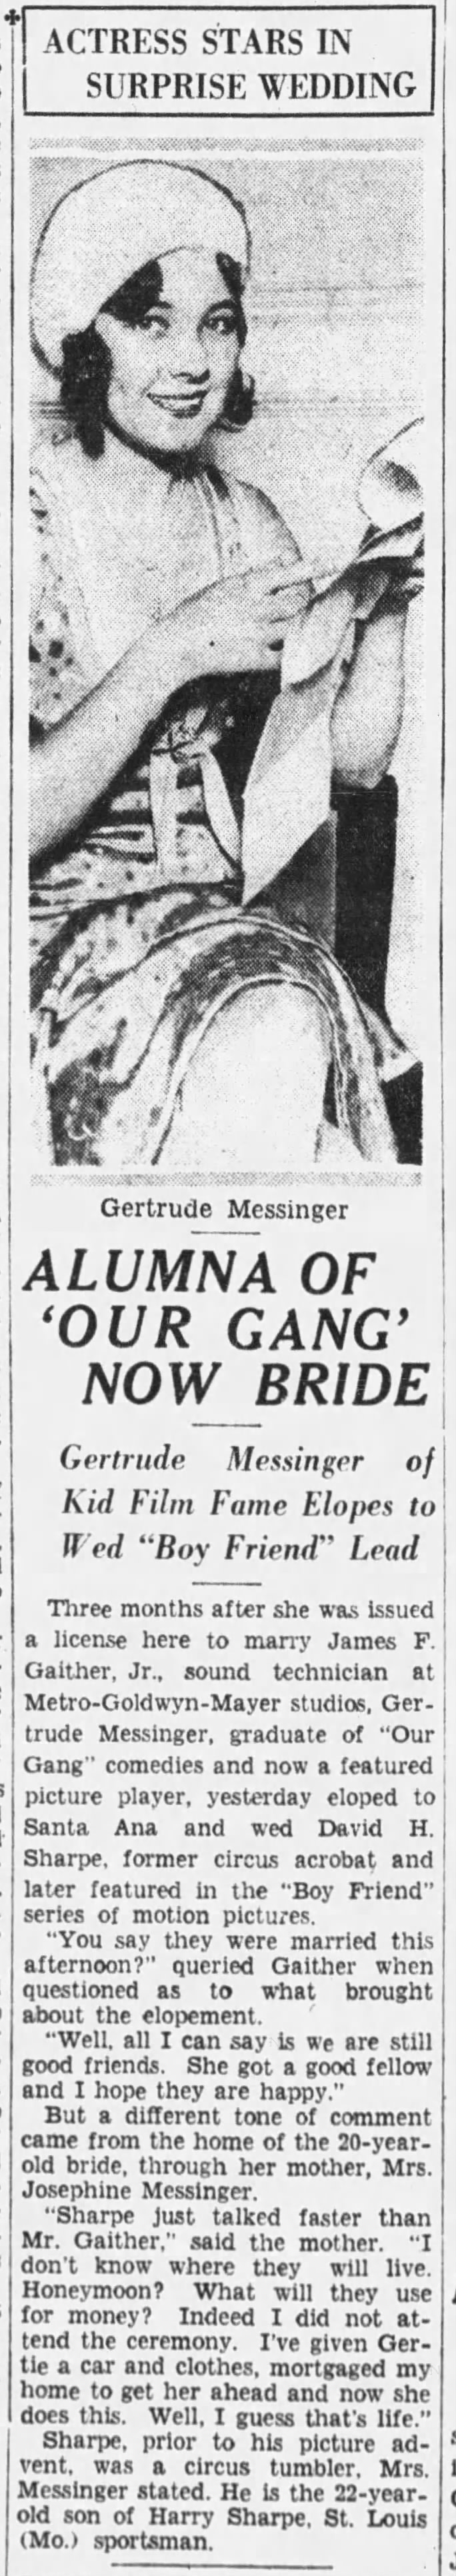 April, 1932 elopement and marriage of actress Gertrude Messinger and actor David Sharpe.